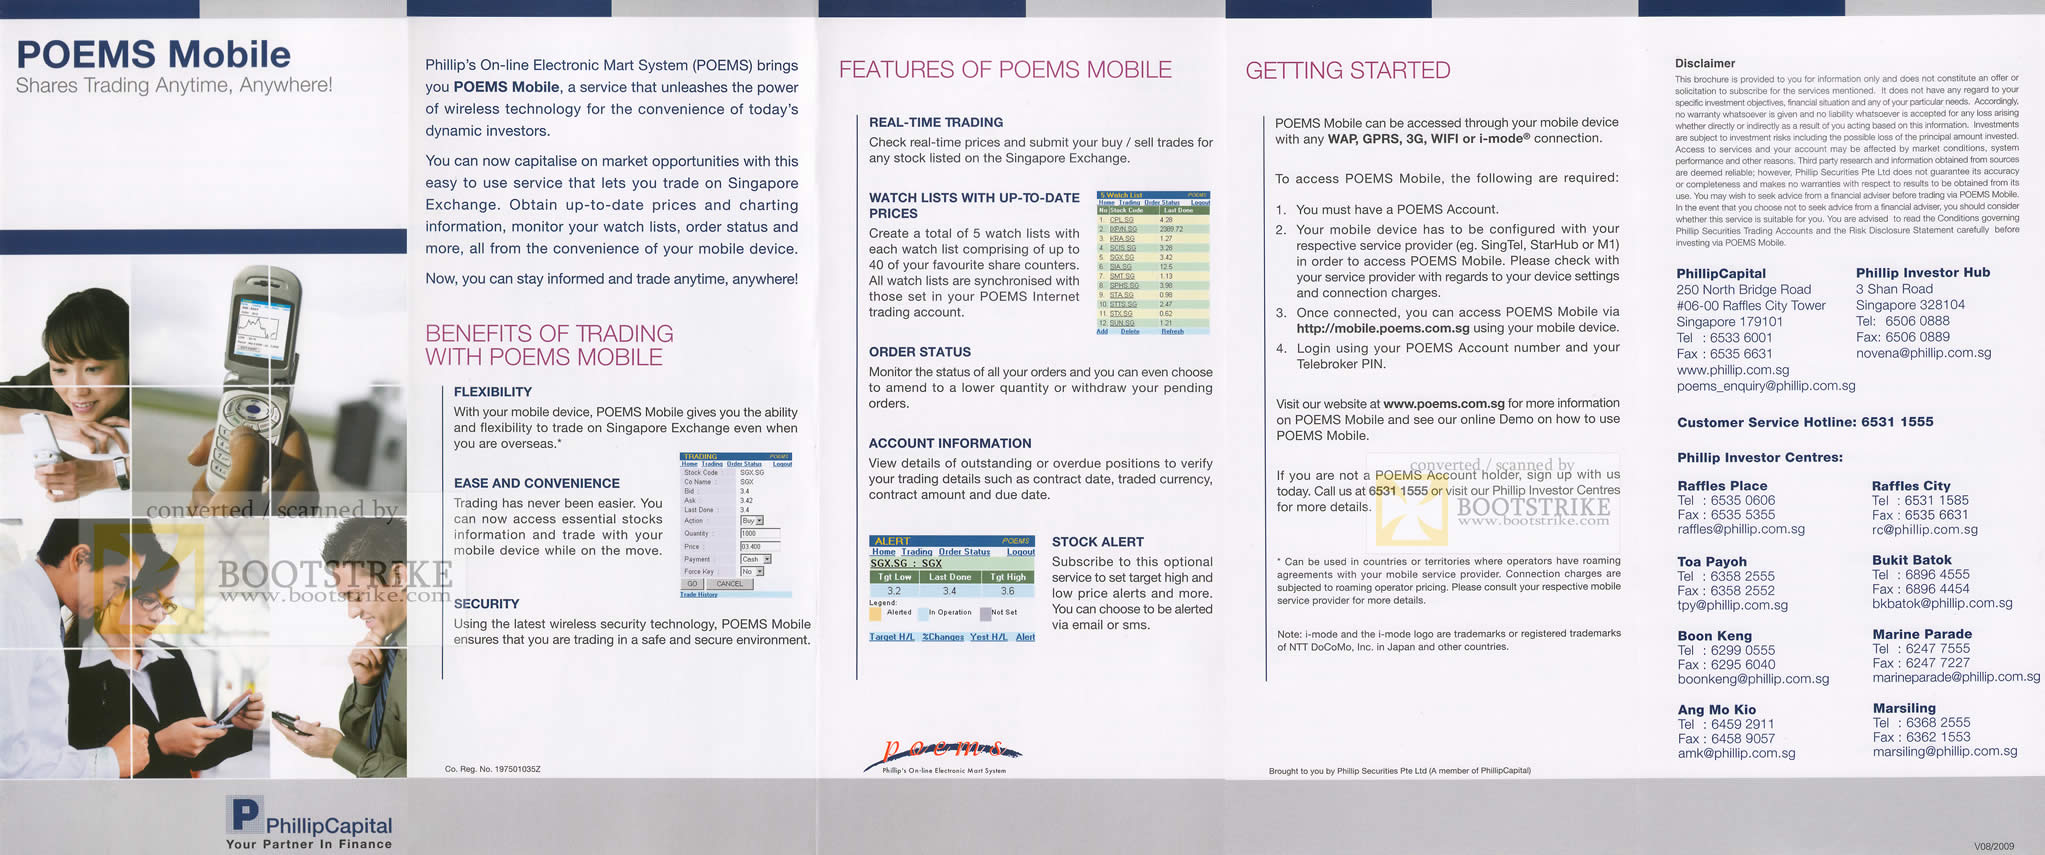 Sitex 2009 price list image brochure of POEMS Mobile Shares Trading